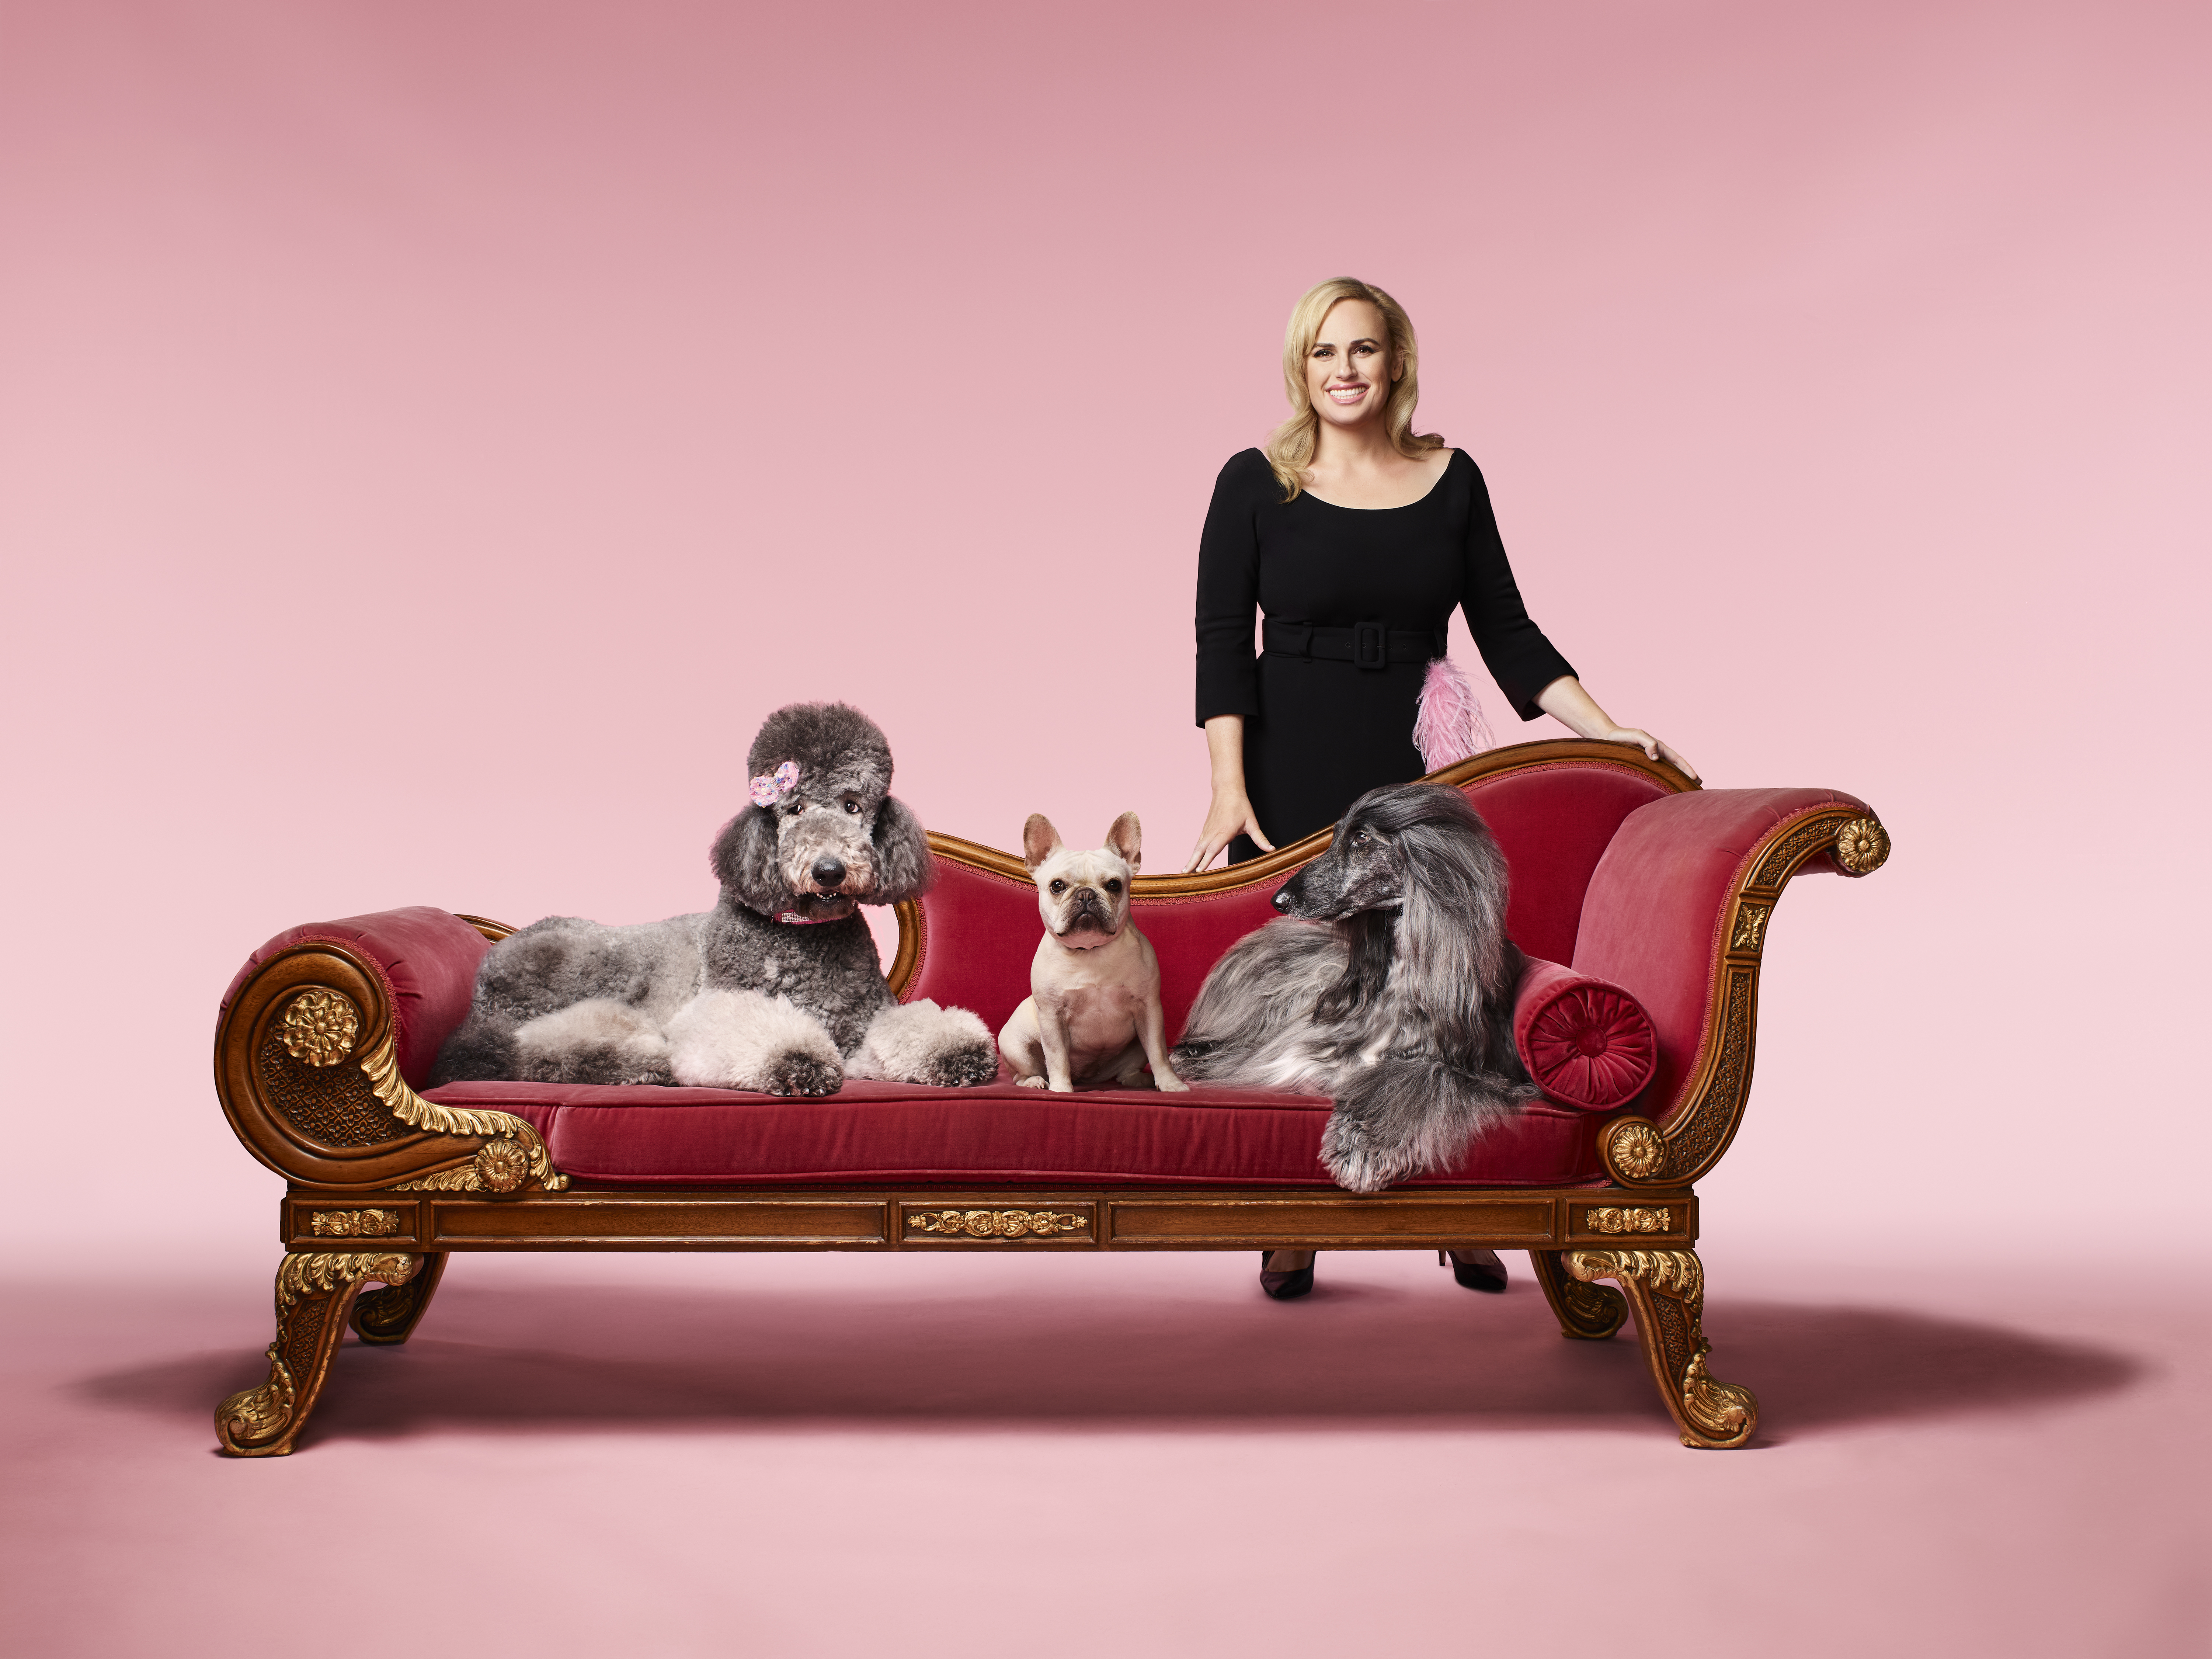 Rebel Wilson pictured with dogs for the ABC TV show "Pooch Perfect." | Source: Getty Images